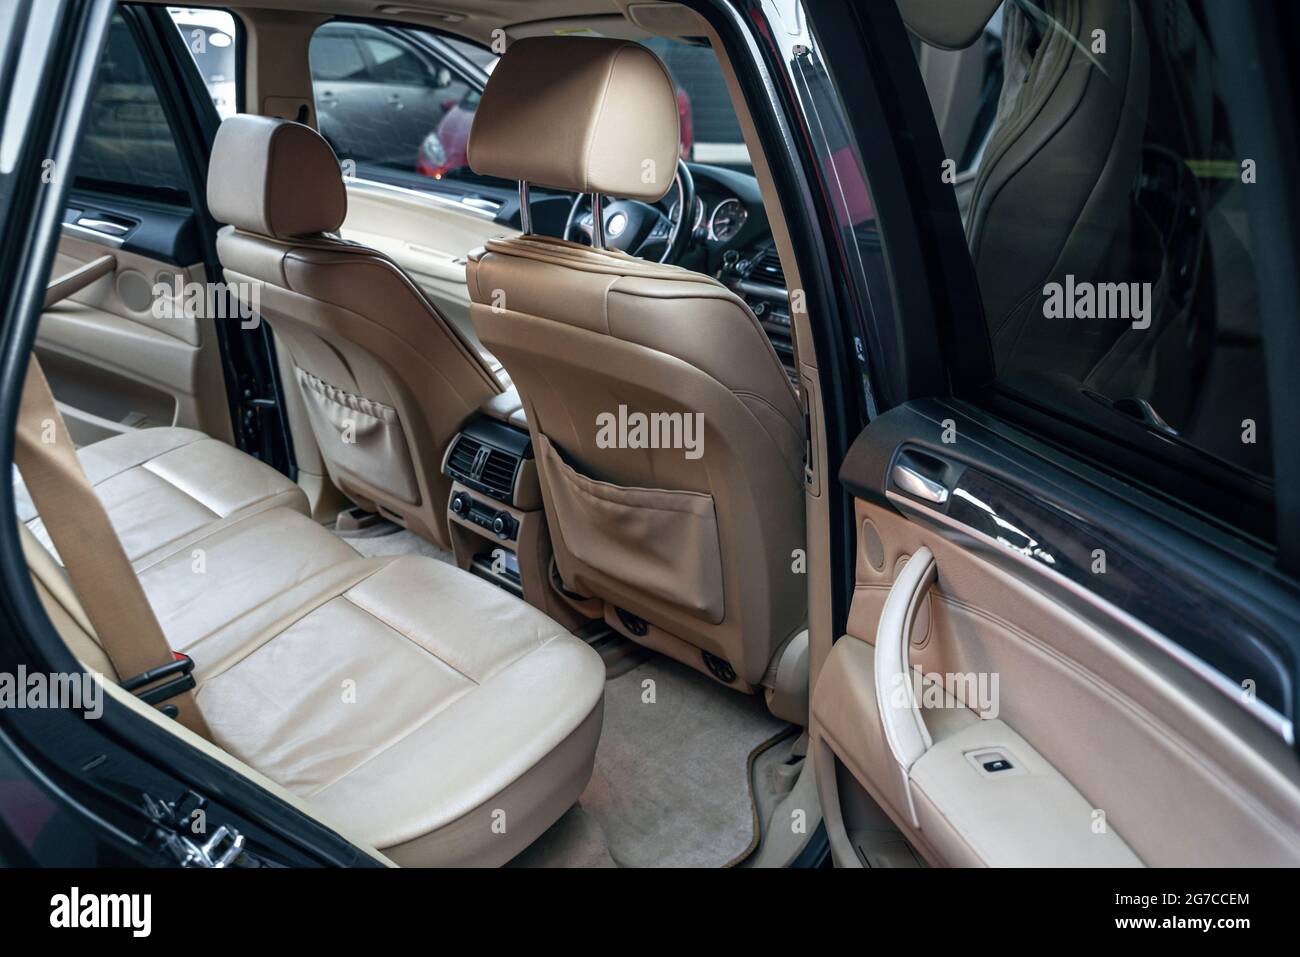 Modern luxury car inside. Comfortable beige leather seats and back passengers seat air conditioning control panel. Interior of a premium vehicle autom Stock Photo